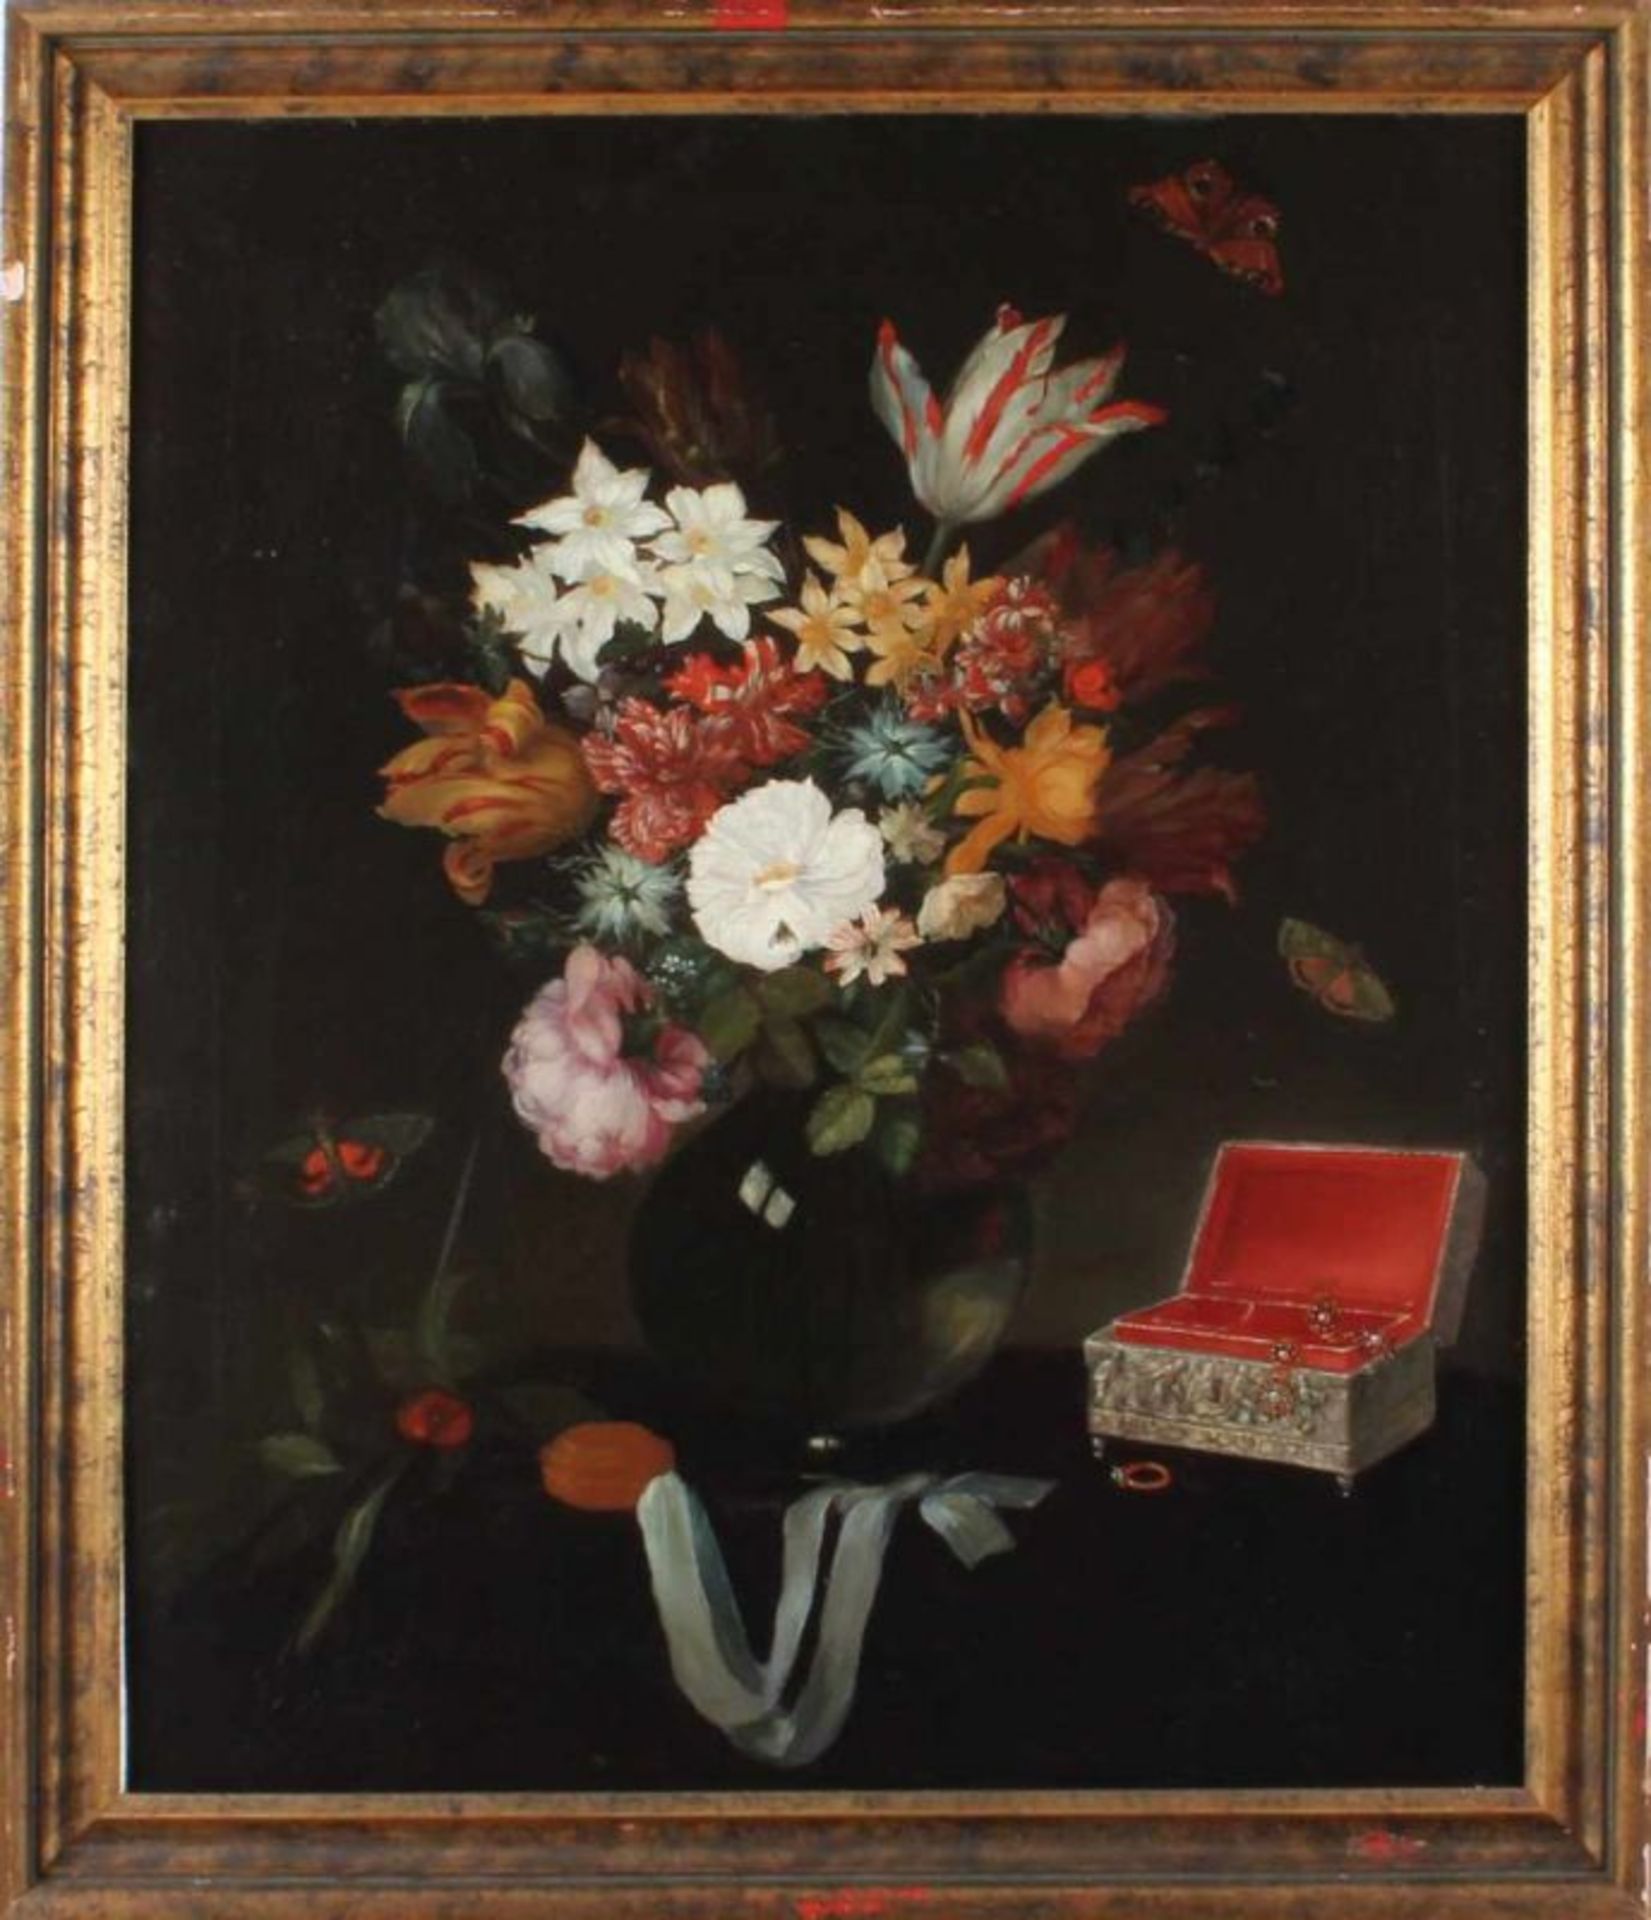 Unsigned 19th century. Still life with vase of flowers, jewelry box lid and butterflies. In 17th